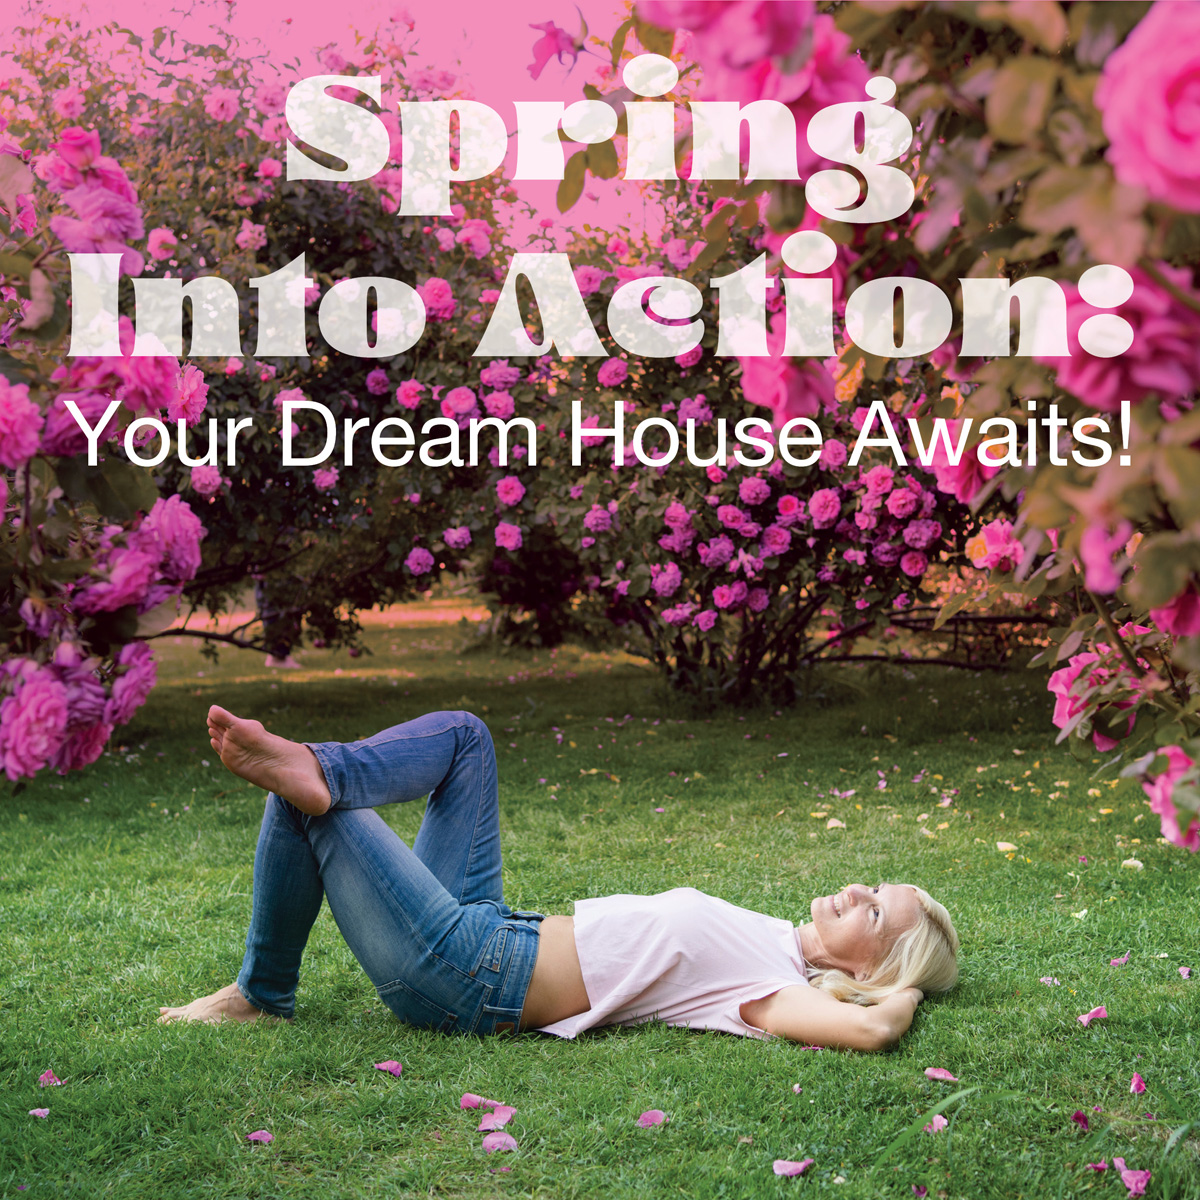 Spring is here and so could be your new home. Reach out and let's make your dream come true!